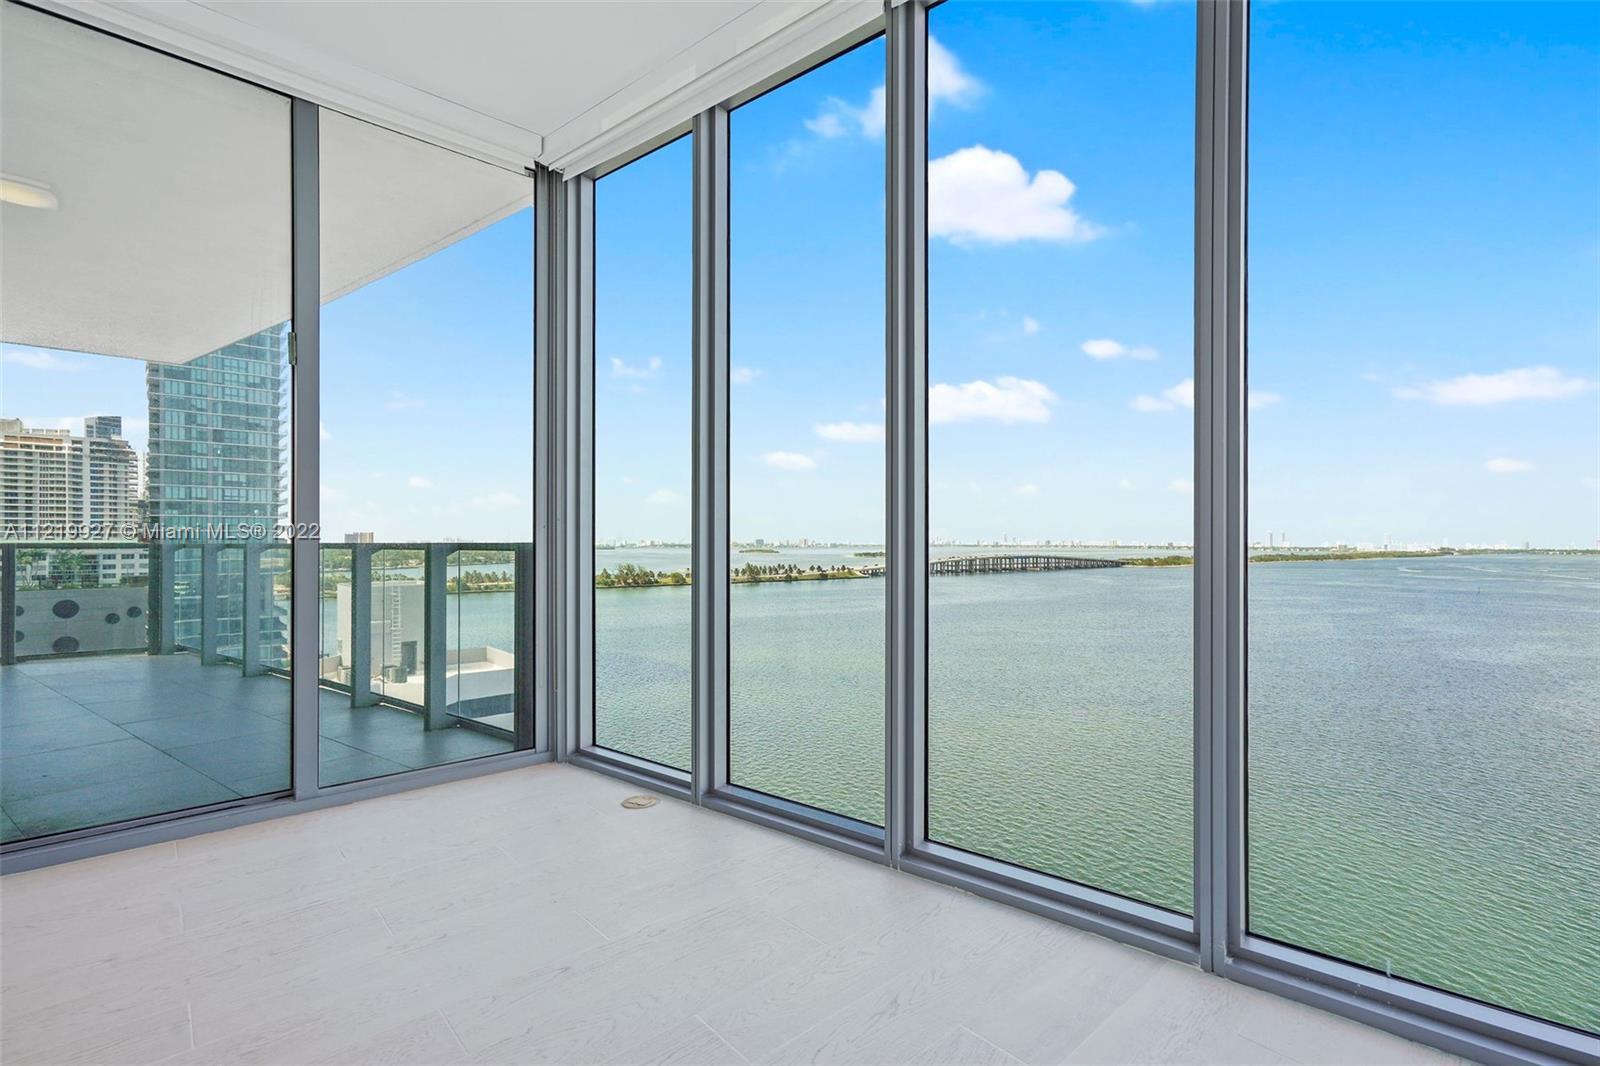 Biscayne Beach! Live in luxury overlooking the Bay to South Beach in the 52 floor masterpiece in Edg